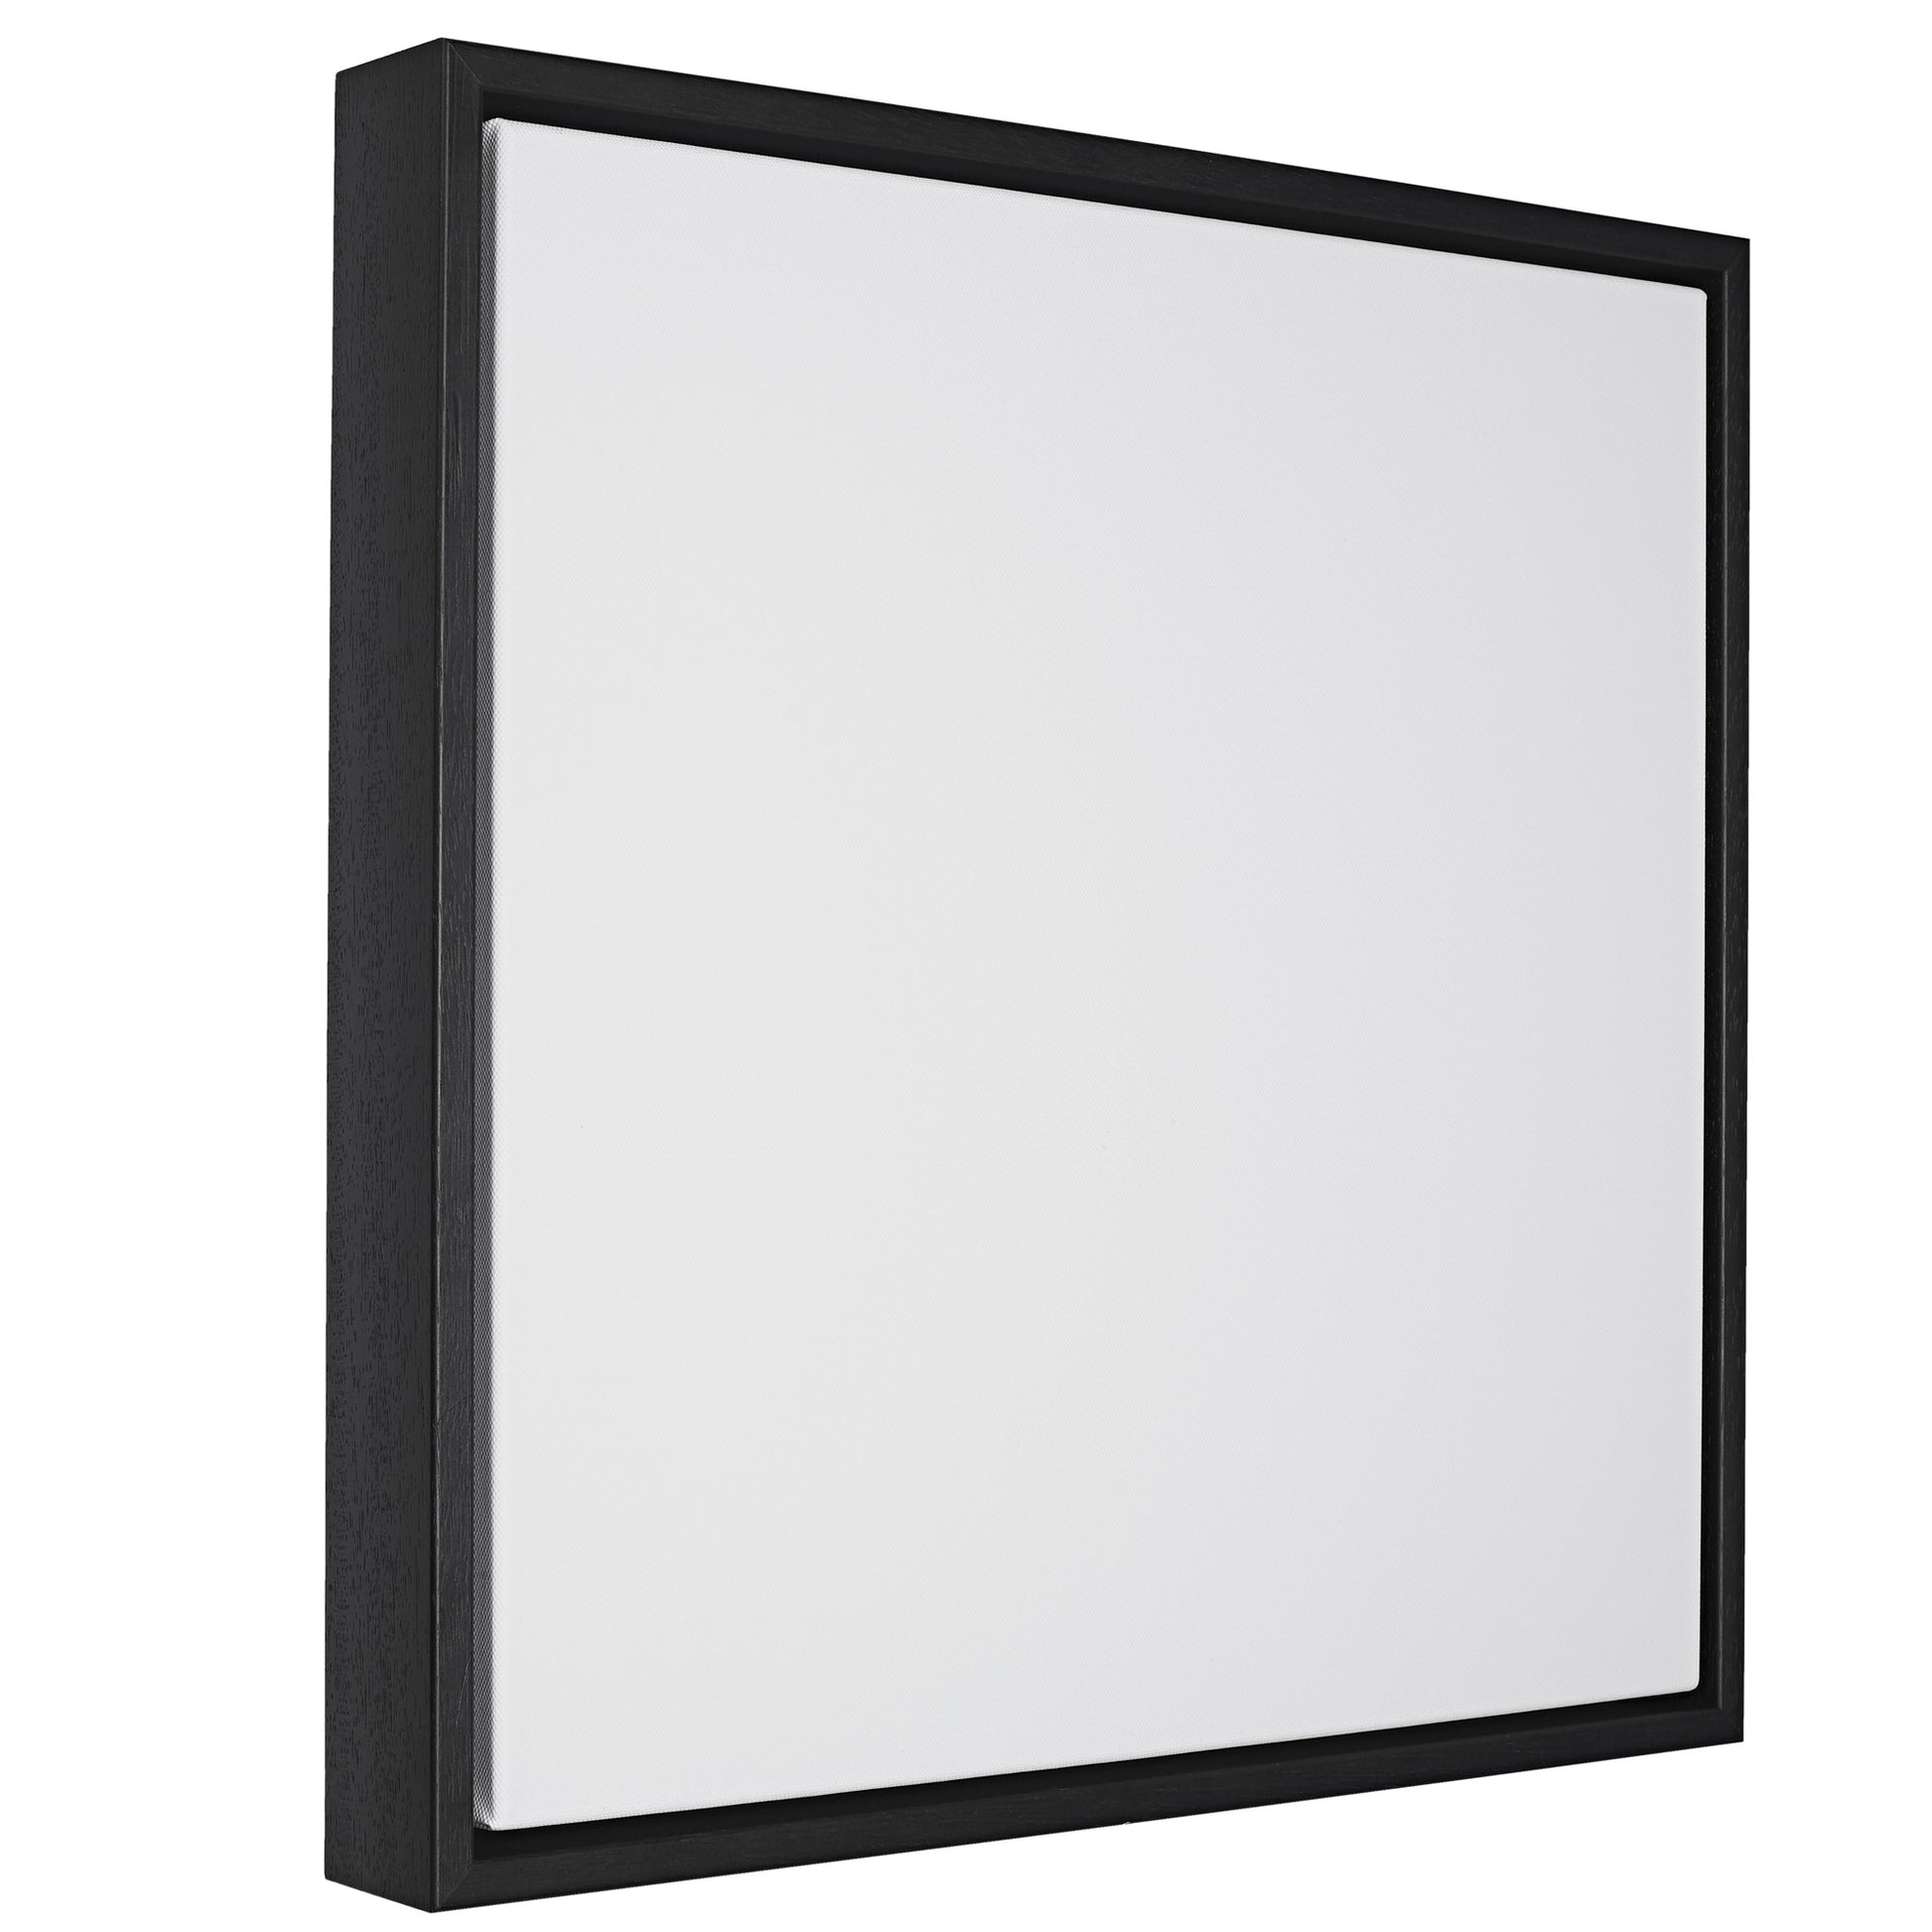 Square-shaped, white canvas with floating black wooden frame photographed on a plain white background.